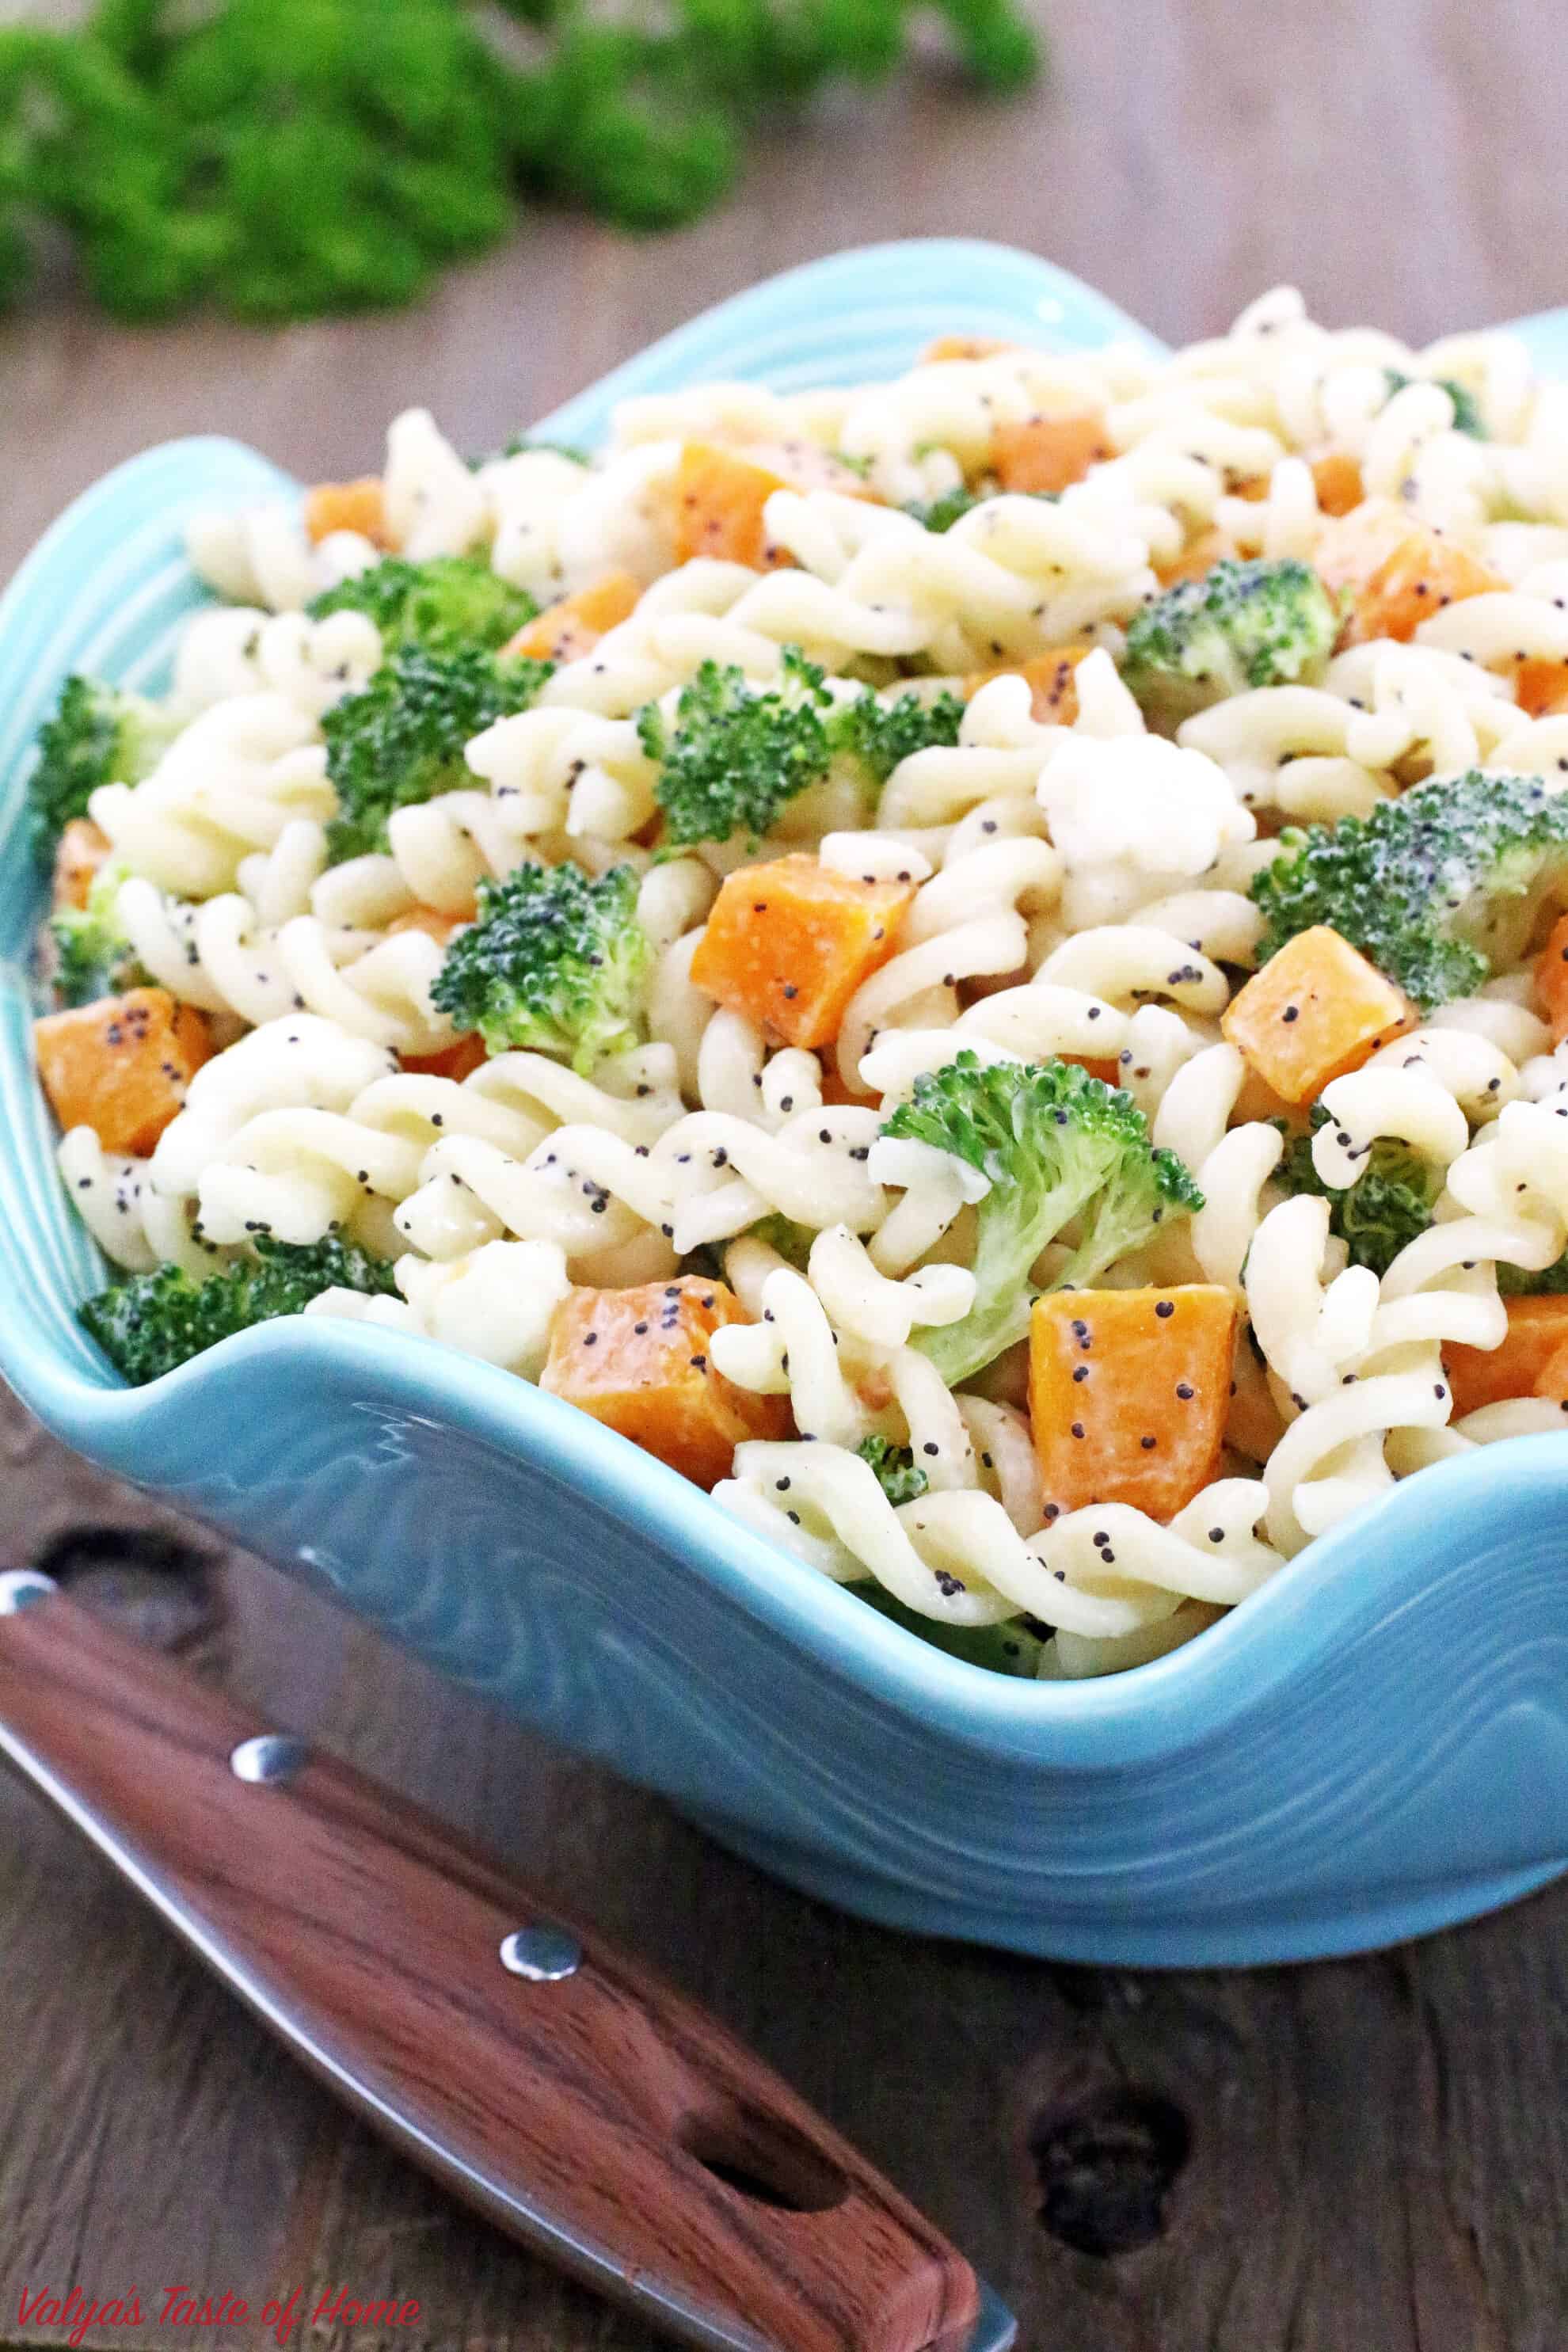 This make ahead, and crowd-pleasing of the Butternut Squash Pasta Salad side dis is another gem in a Thanksgiving spread. Or any gathering, really. Organic pasta tossed with fresh broccoli, cauliflower, roasted butternut squash and dressed with homemade ranch makes this salad taste absolutely incredible! #butternutsquashpastasalad #winterpastasalad #thanksgivingpastasalad #coldfallpastasalad 